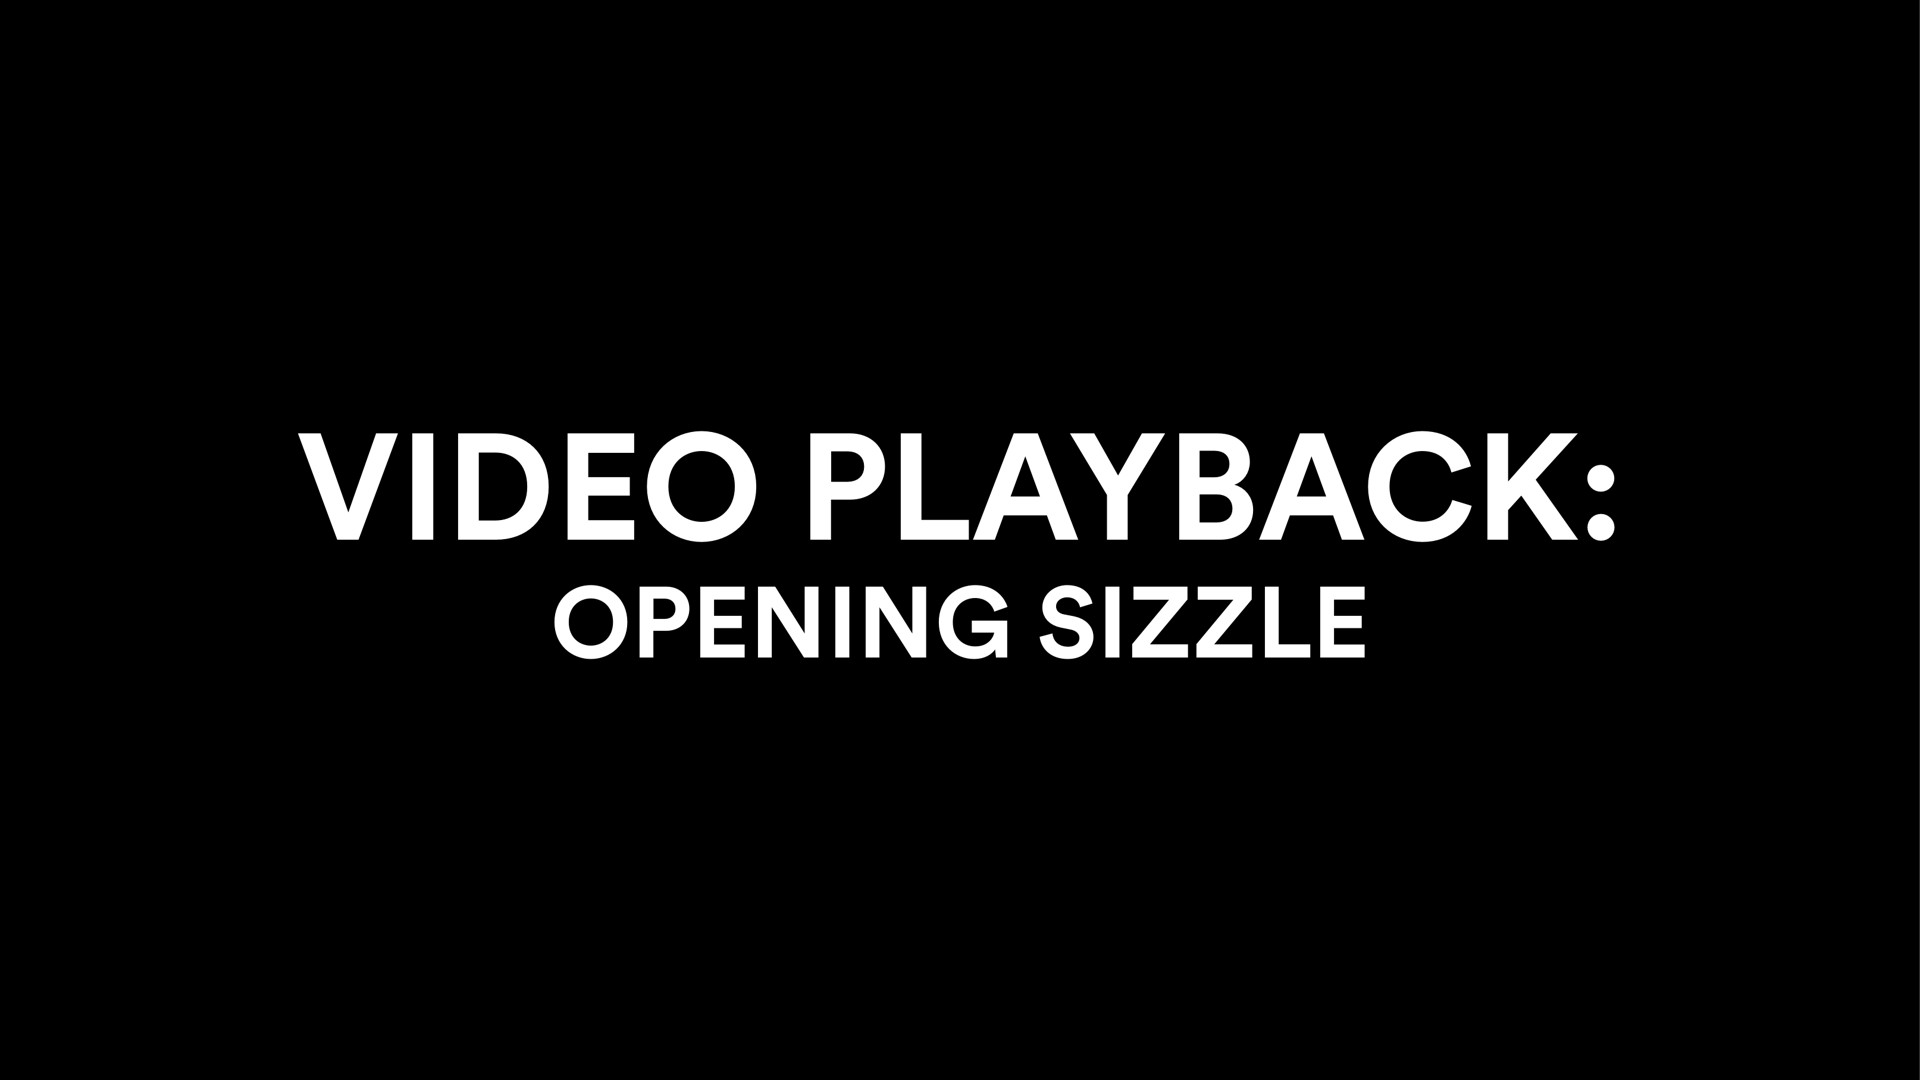 video playback opening sizzle | Spotify